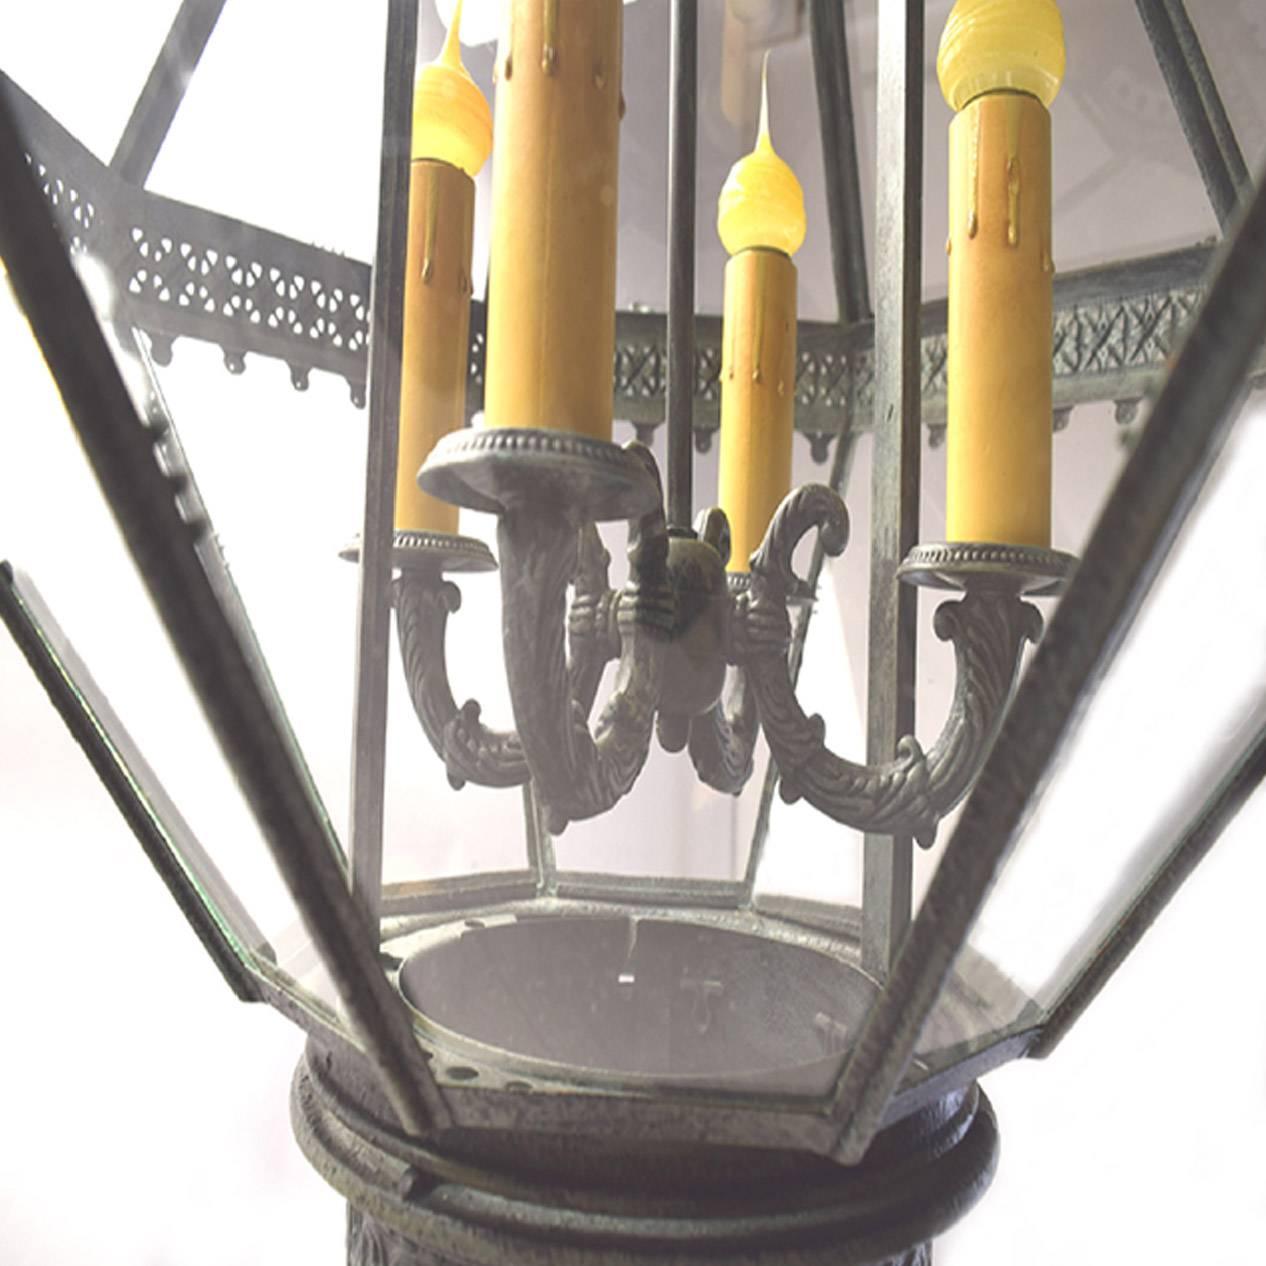 Antique French Napoleon III period cast iron and tole peinte hanging lantern; with a cylindrical paneled corona over an octagonal body of two rows of tapered glass panels with a pierced girdle, congaing four candle arms, over a circular base with